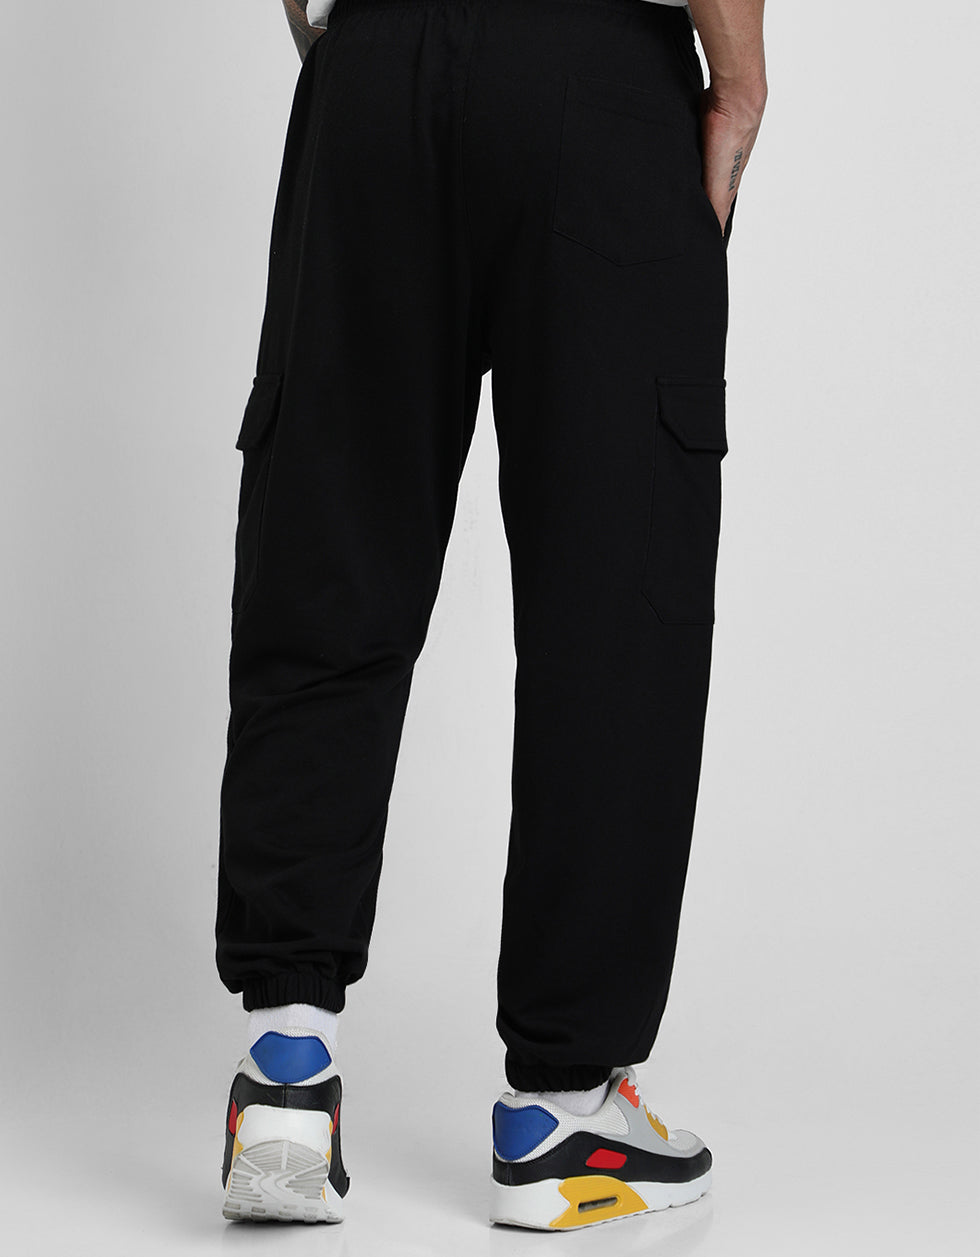 Black Solid Baggy Fit Cargo Pants